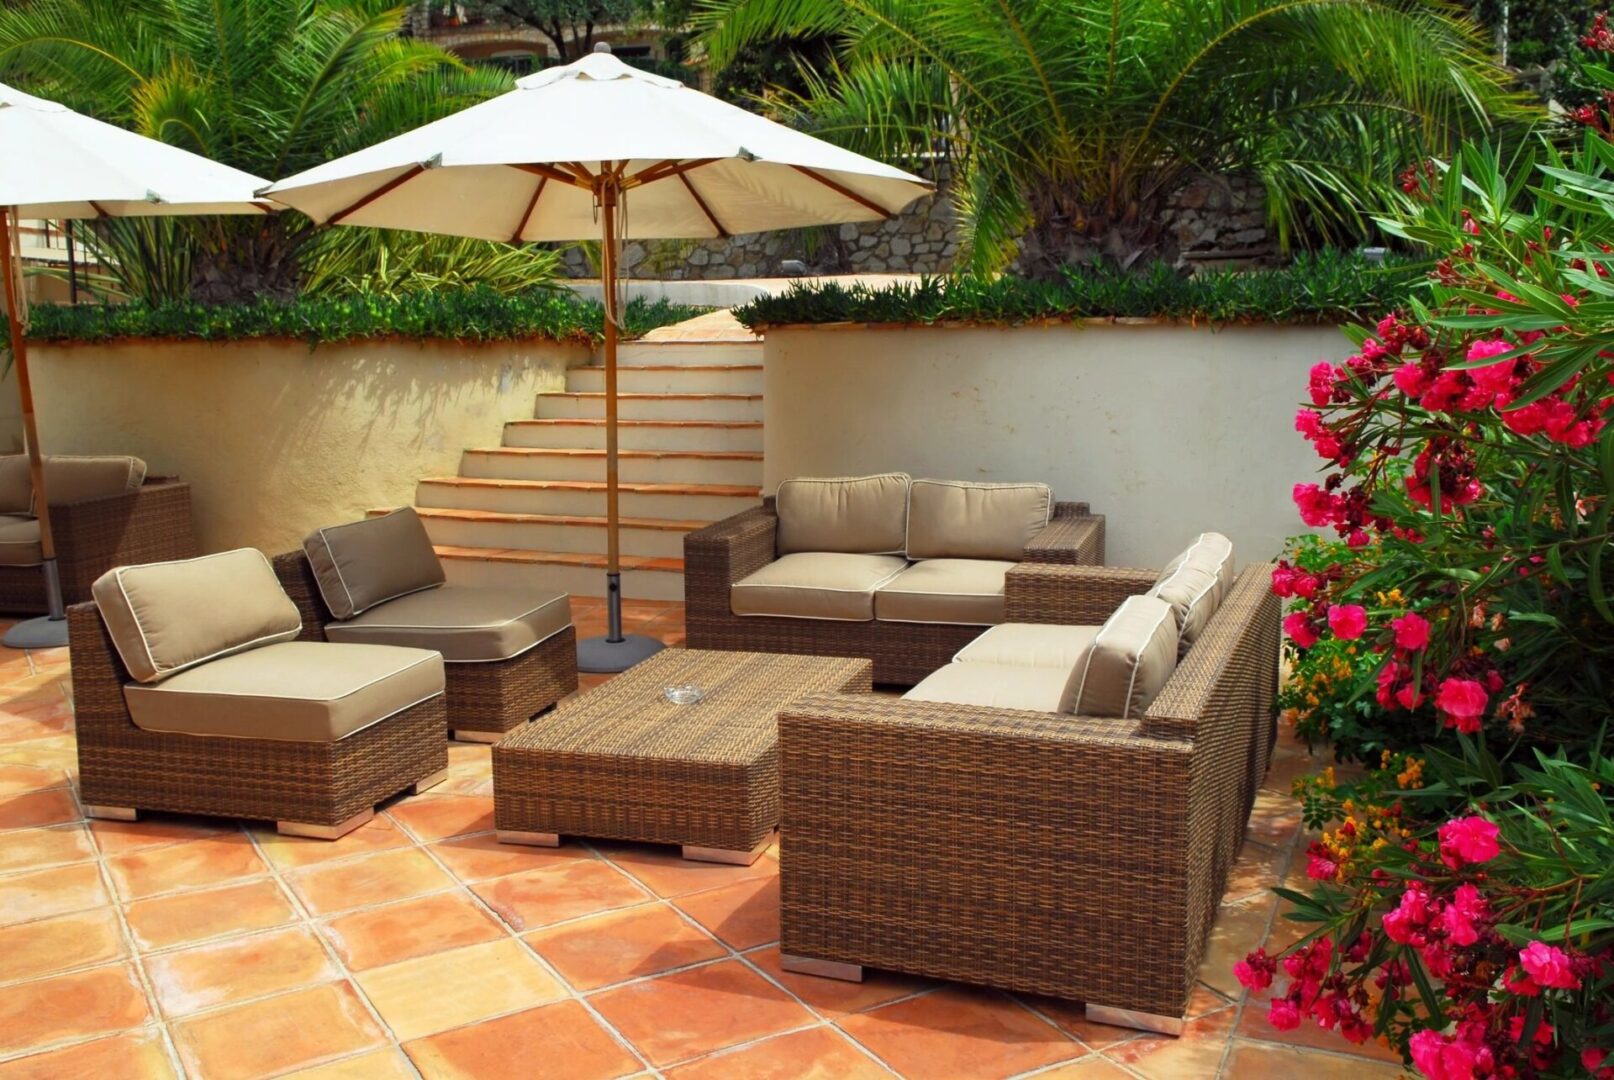 A patio with furniture and an umbrella.